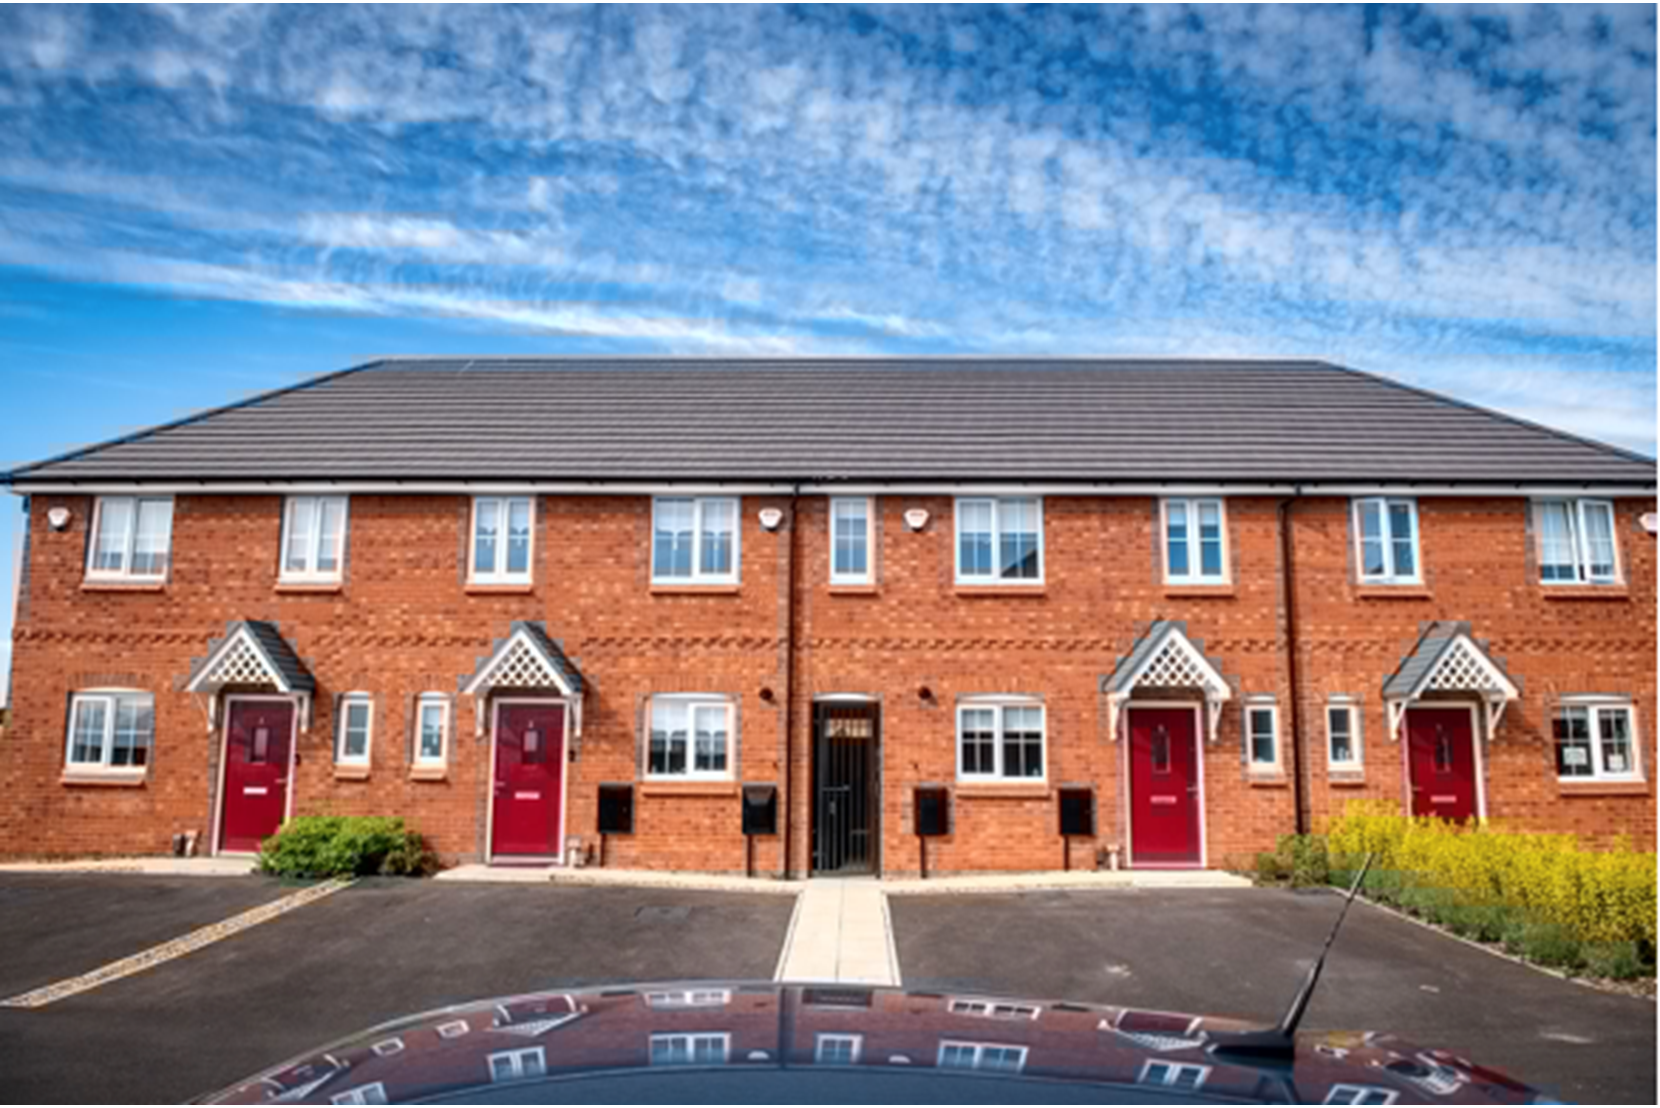 Houses to Rent by Simple Life at Dutton Fields, Deeside, CH5, development panoramic